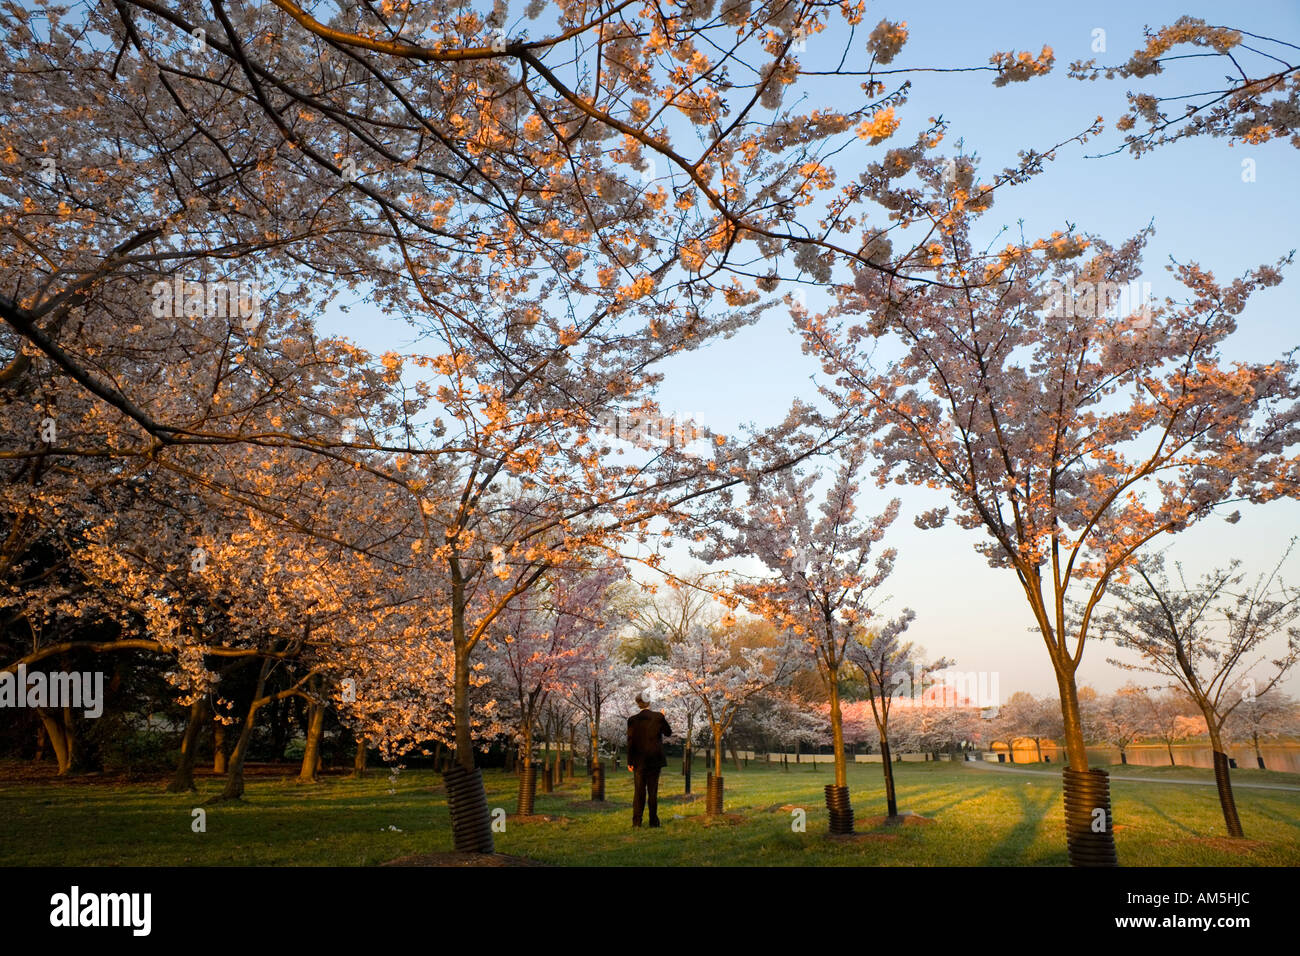 Man in business suit wandering under cherry blossom trees in Washington DC very early morning before the crowds come in. Stock Photo